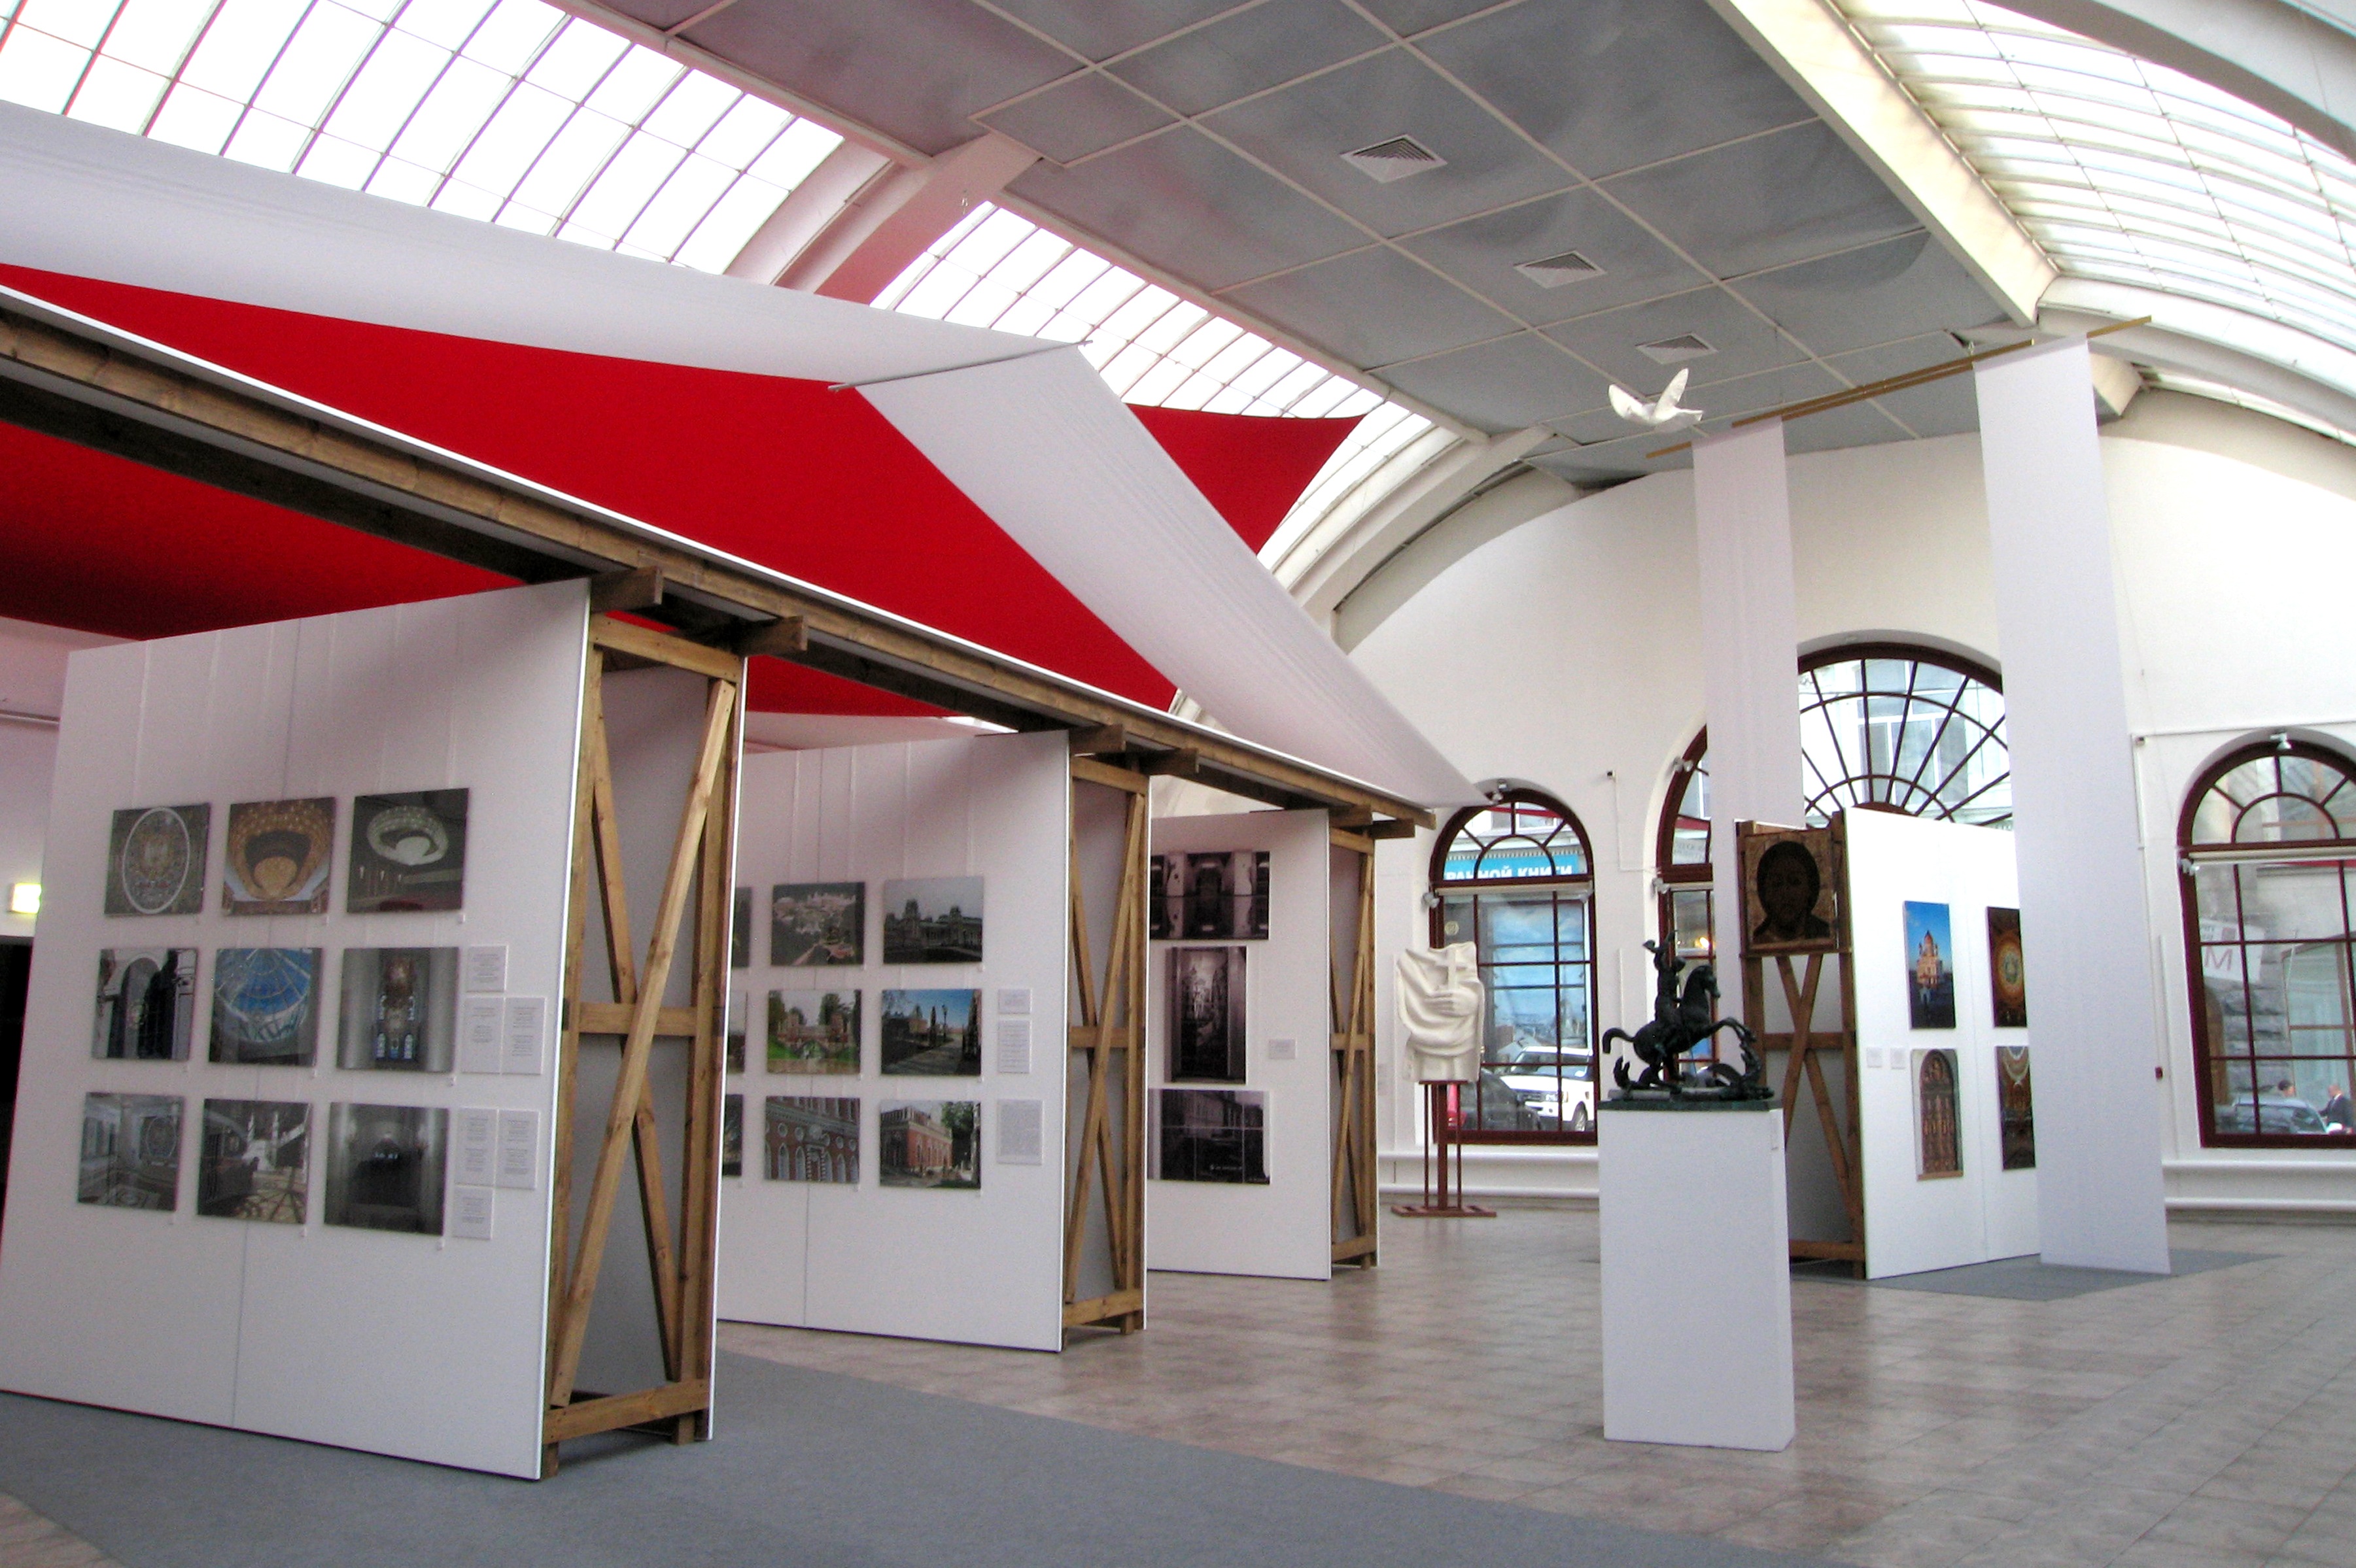 The exhibition Moscow - our heritage. The Moscow City Government. Committee on cultural heritage of the city of Moscow. Moscow Union of Artists. Moscow House of Artists, Kuznetsk bridge